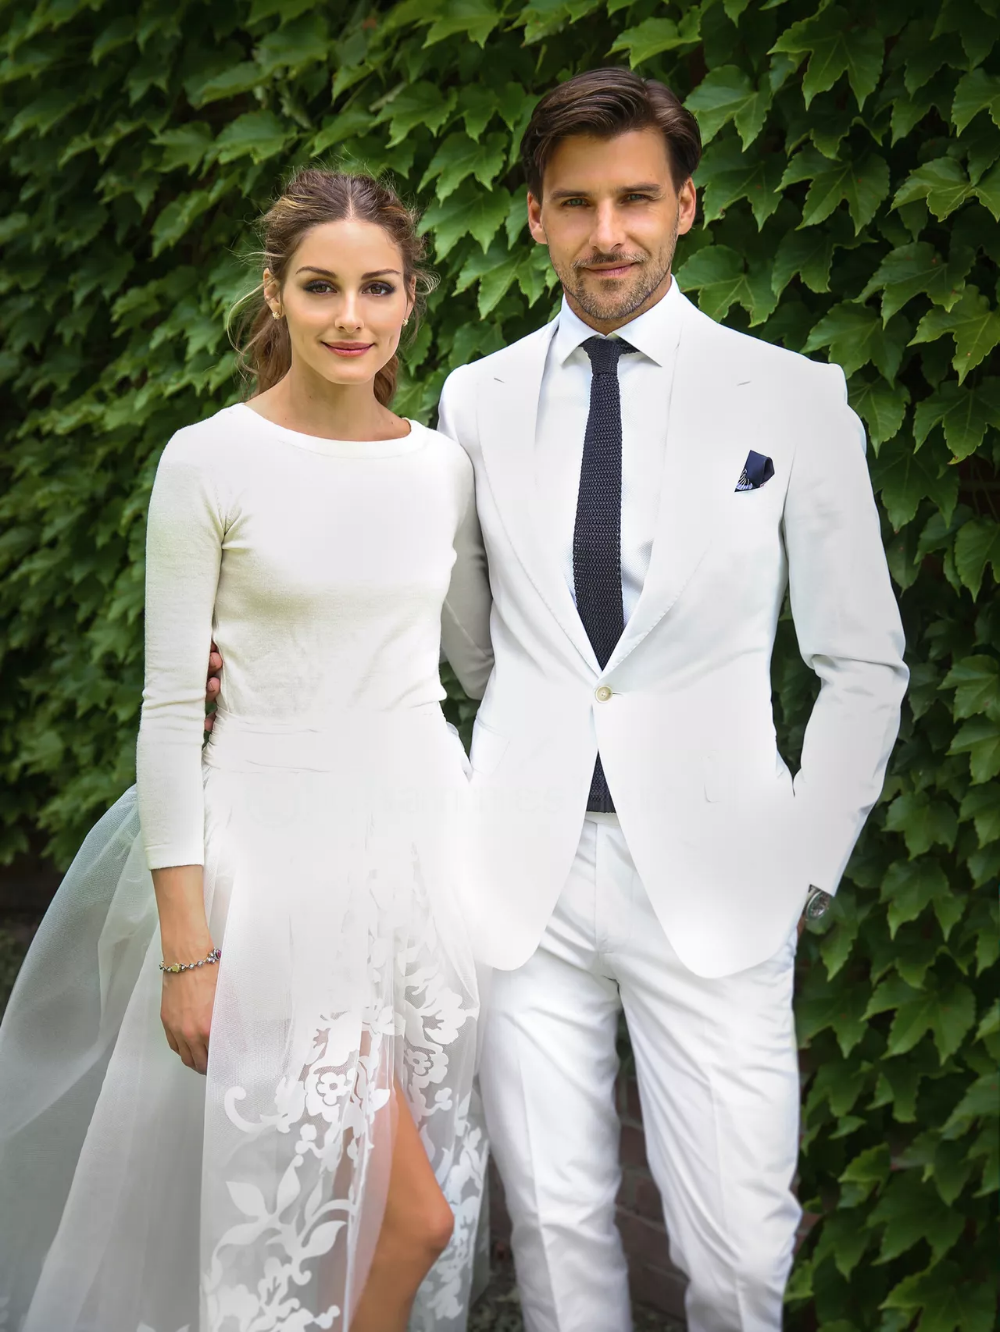 How To
Choose The Best Celebrity Wedding Dresses